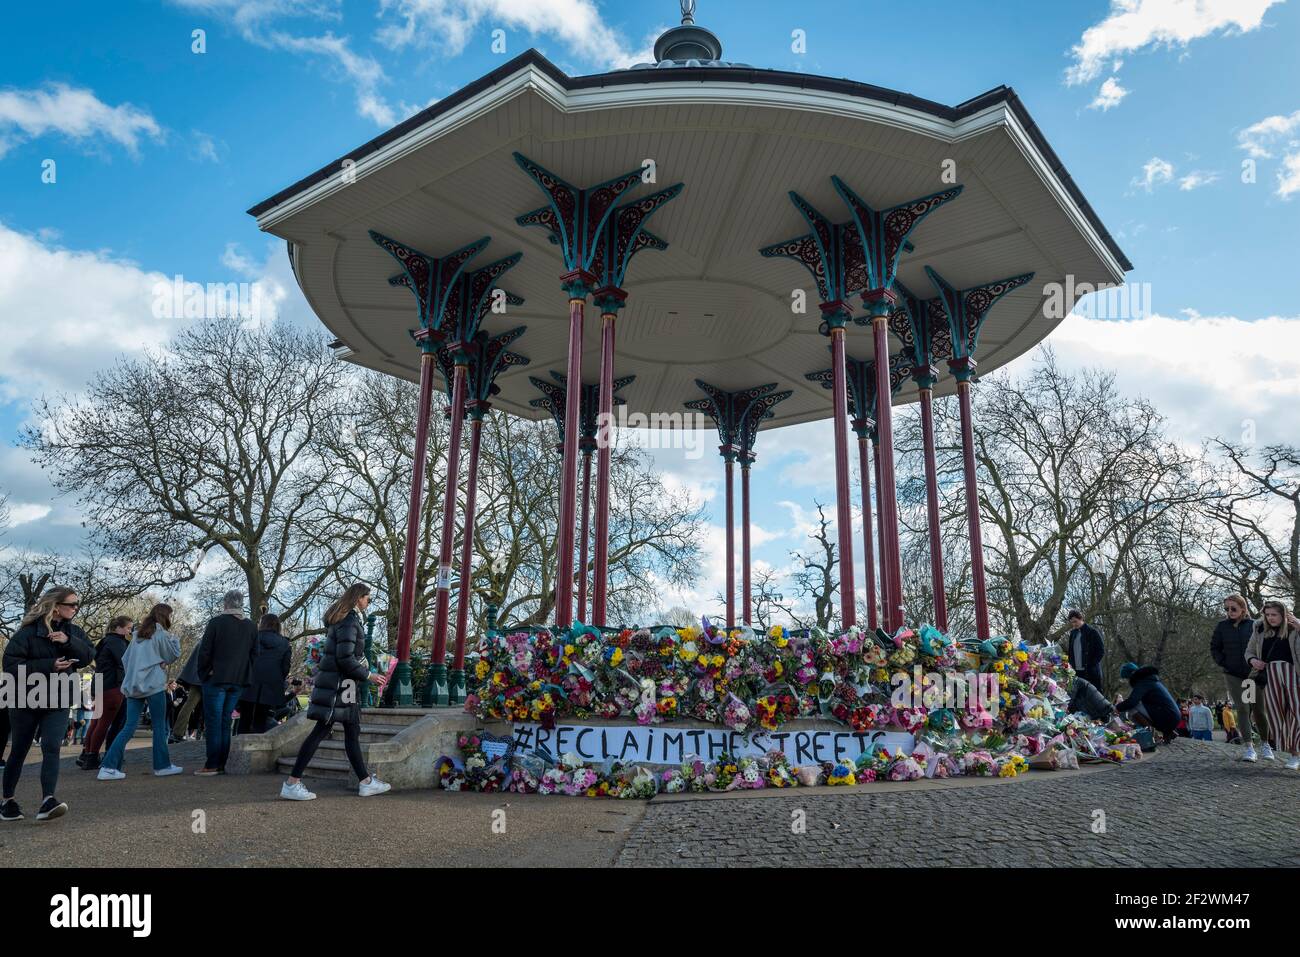 London, UK.  13 March 2021.  People lay floral tributes at the bandstand on Clapham Common to remember Sarah Everard.  Wayne Couzens, 48, a serving Met Police officer, has been charged with her kidnap and murder after she walked home close to Clapham Common in south London.  The 33-year-old's body was found in woodland in Kent more than a week after she was last spotted on 3 March.  Credit: Stephen Chung / Alamy Live News Stock Photo